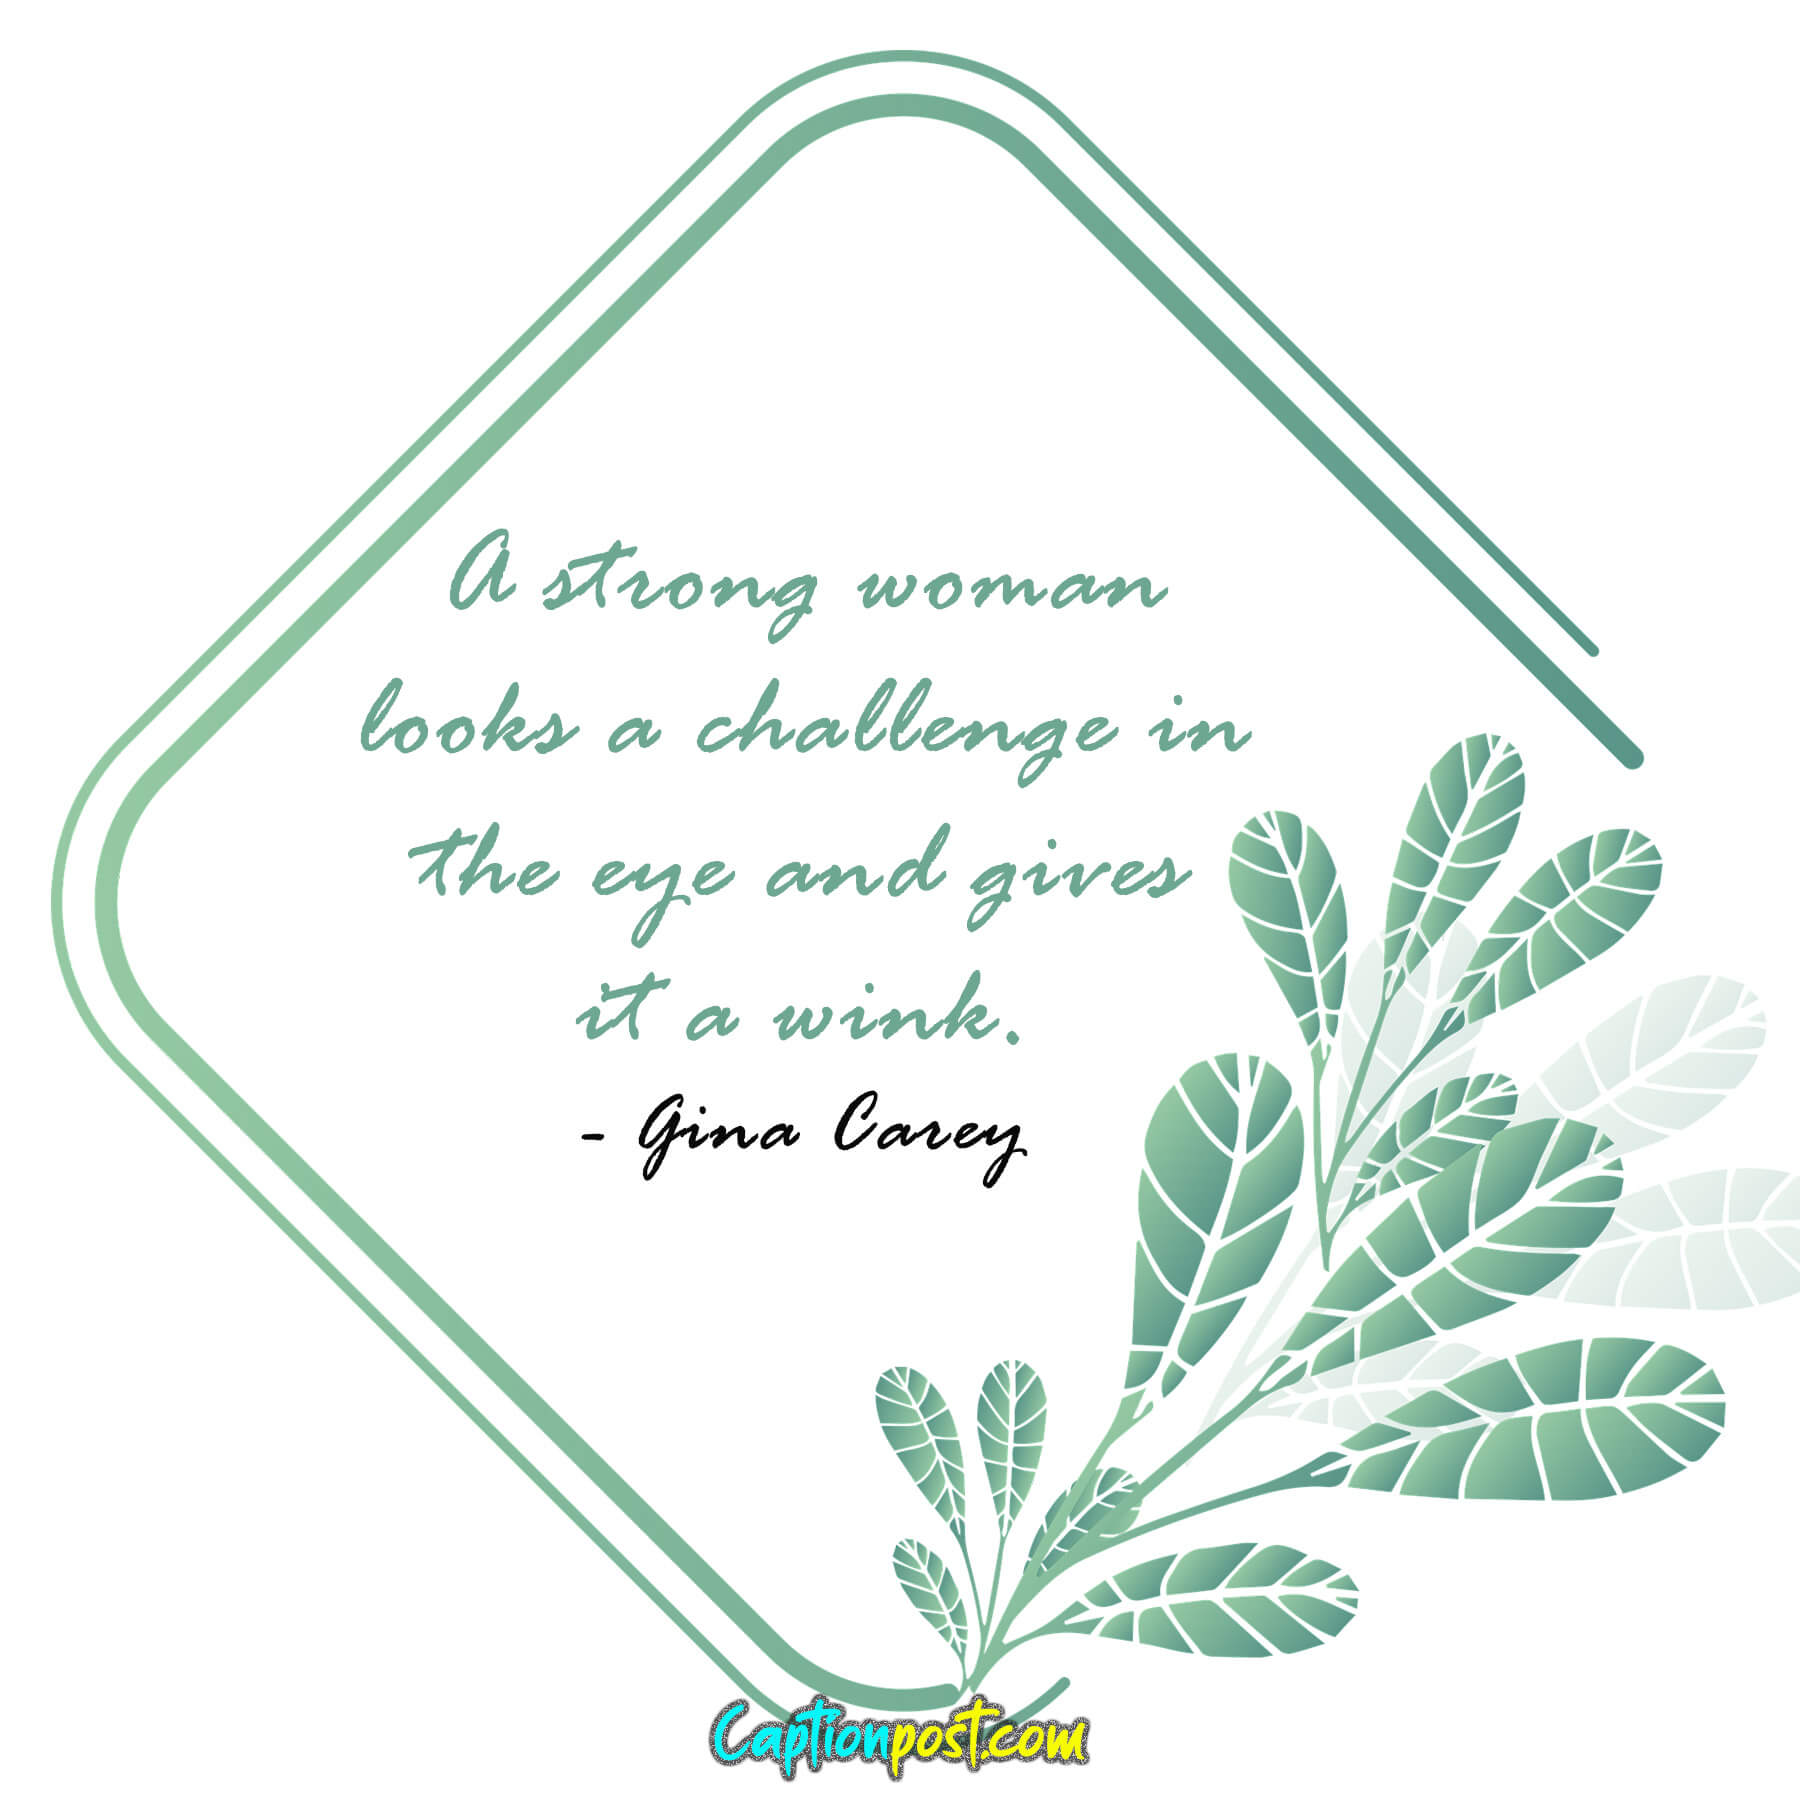 60 International Womens Day Quotes That Will Empower You Captionpost 7275